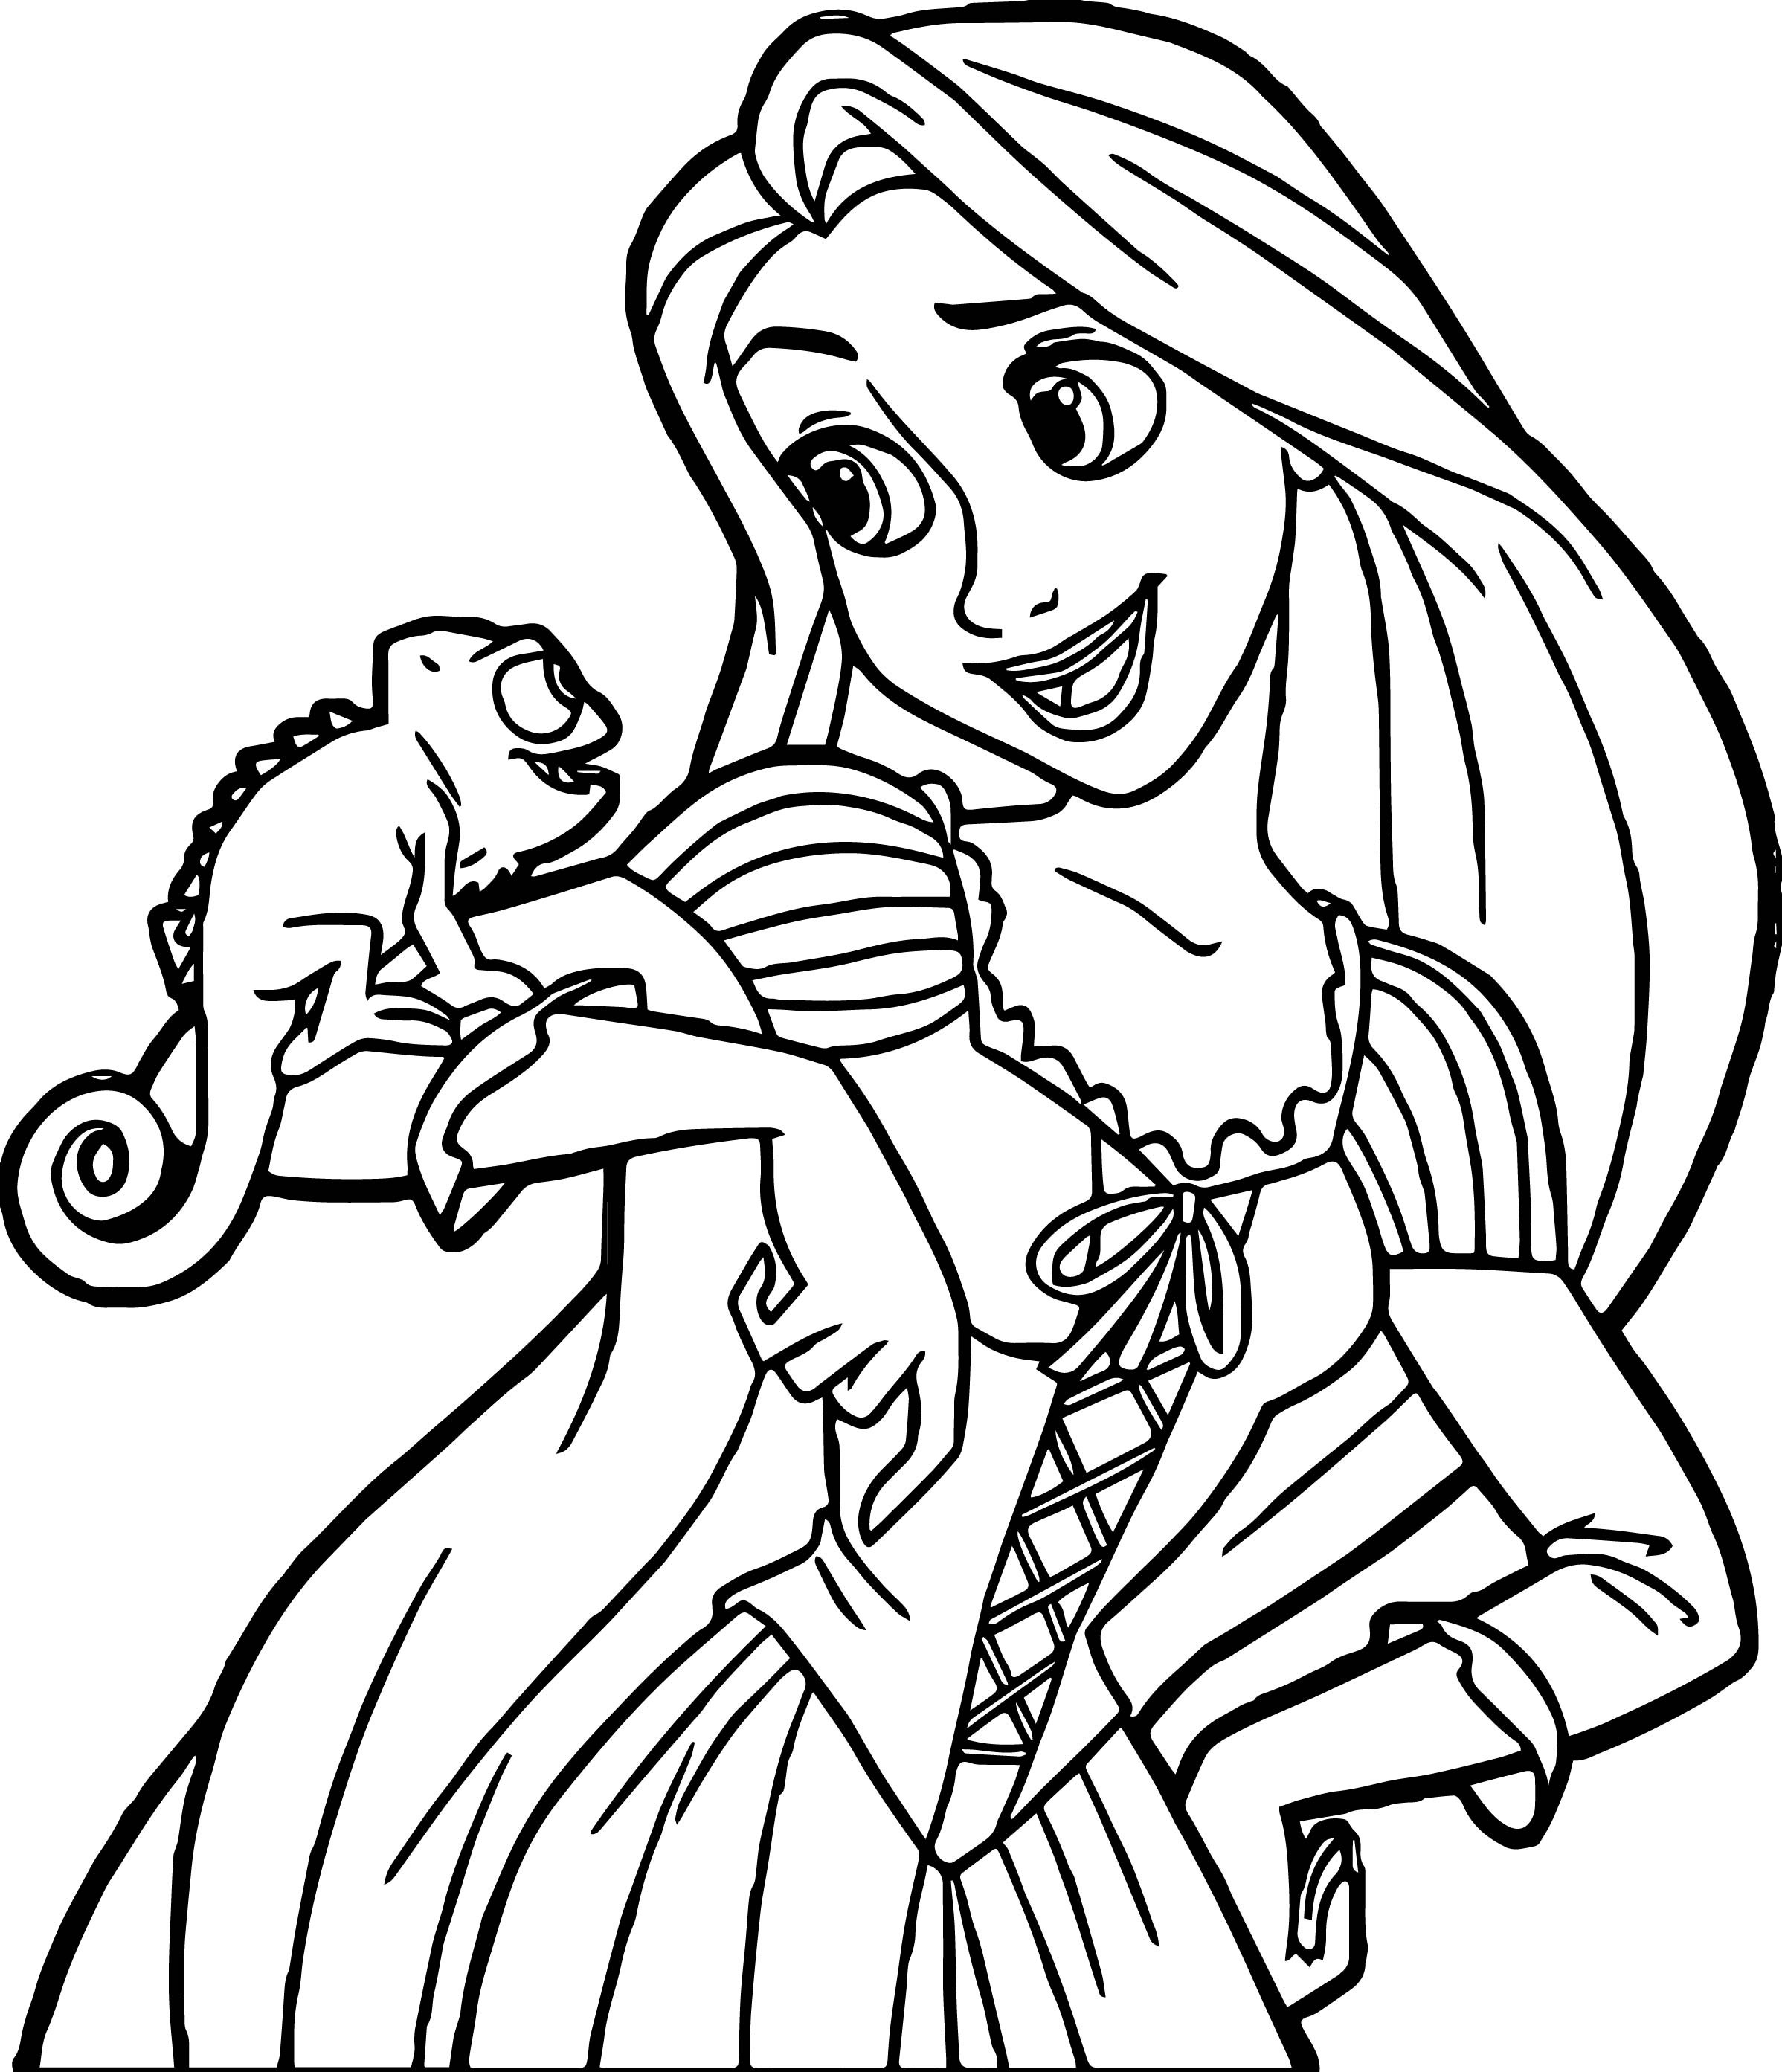 Crayola Disney Princess Coloring Pages Coloring Pages